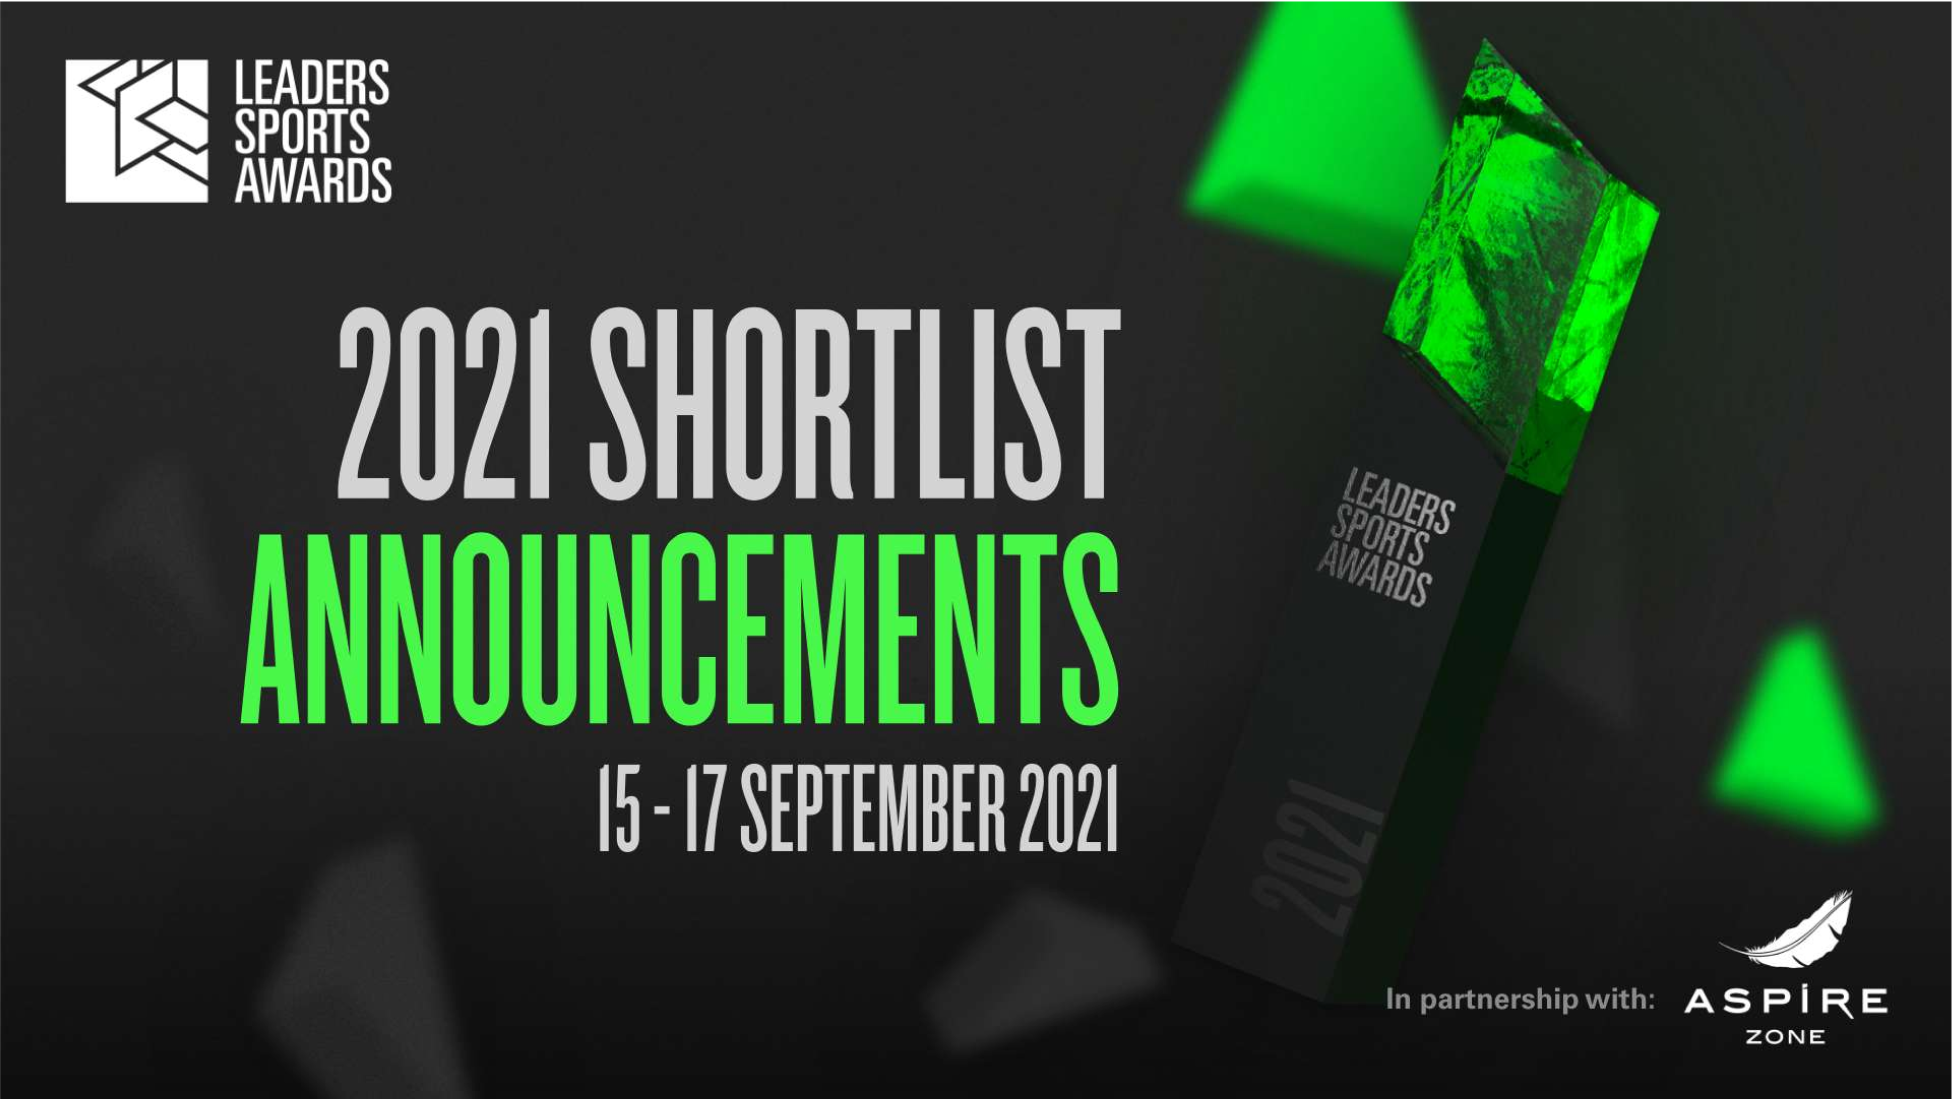 Leaders Sports Awards 2021 Creative for Shortlist Announcement